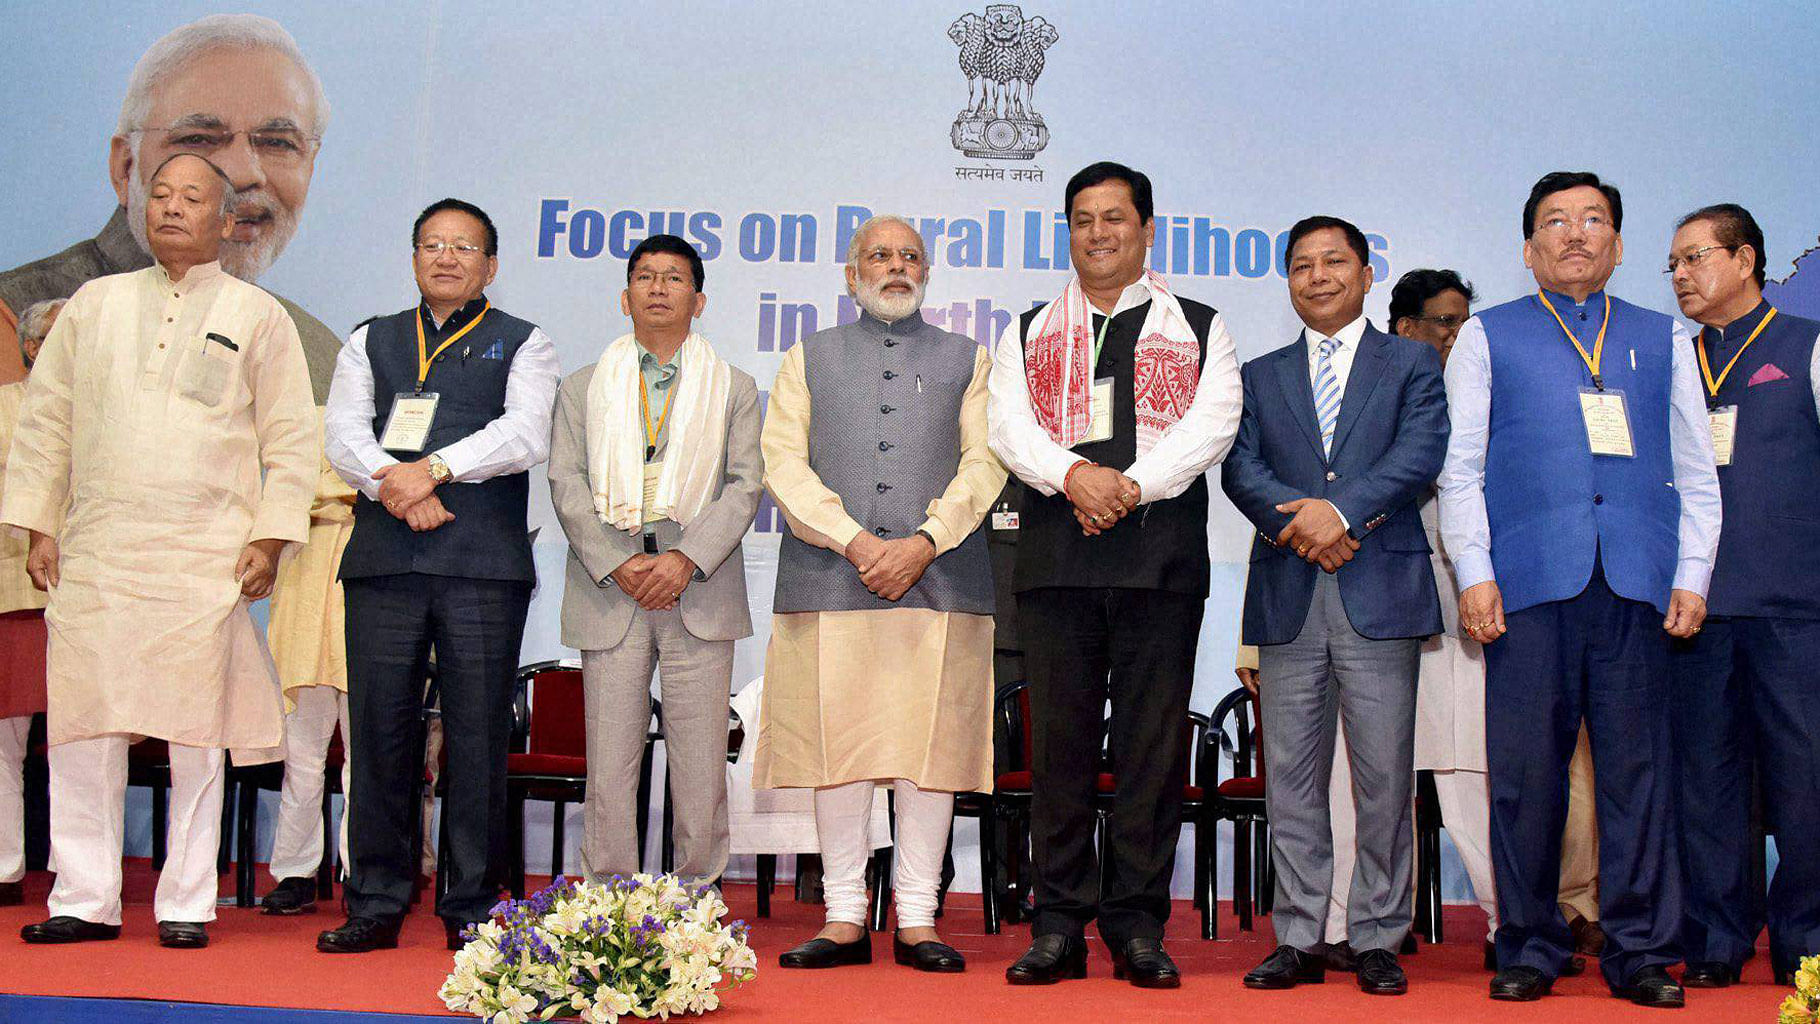 

Prime Minister Narendra Modi with Northeastern states Chief Ministers at a public meeting in Shillong on Friday. (Photo: PTI)